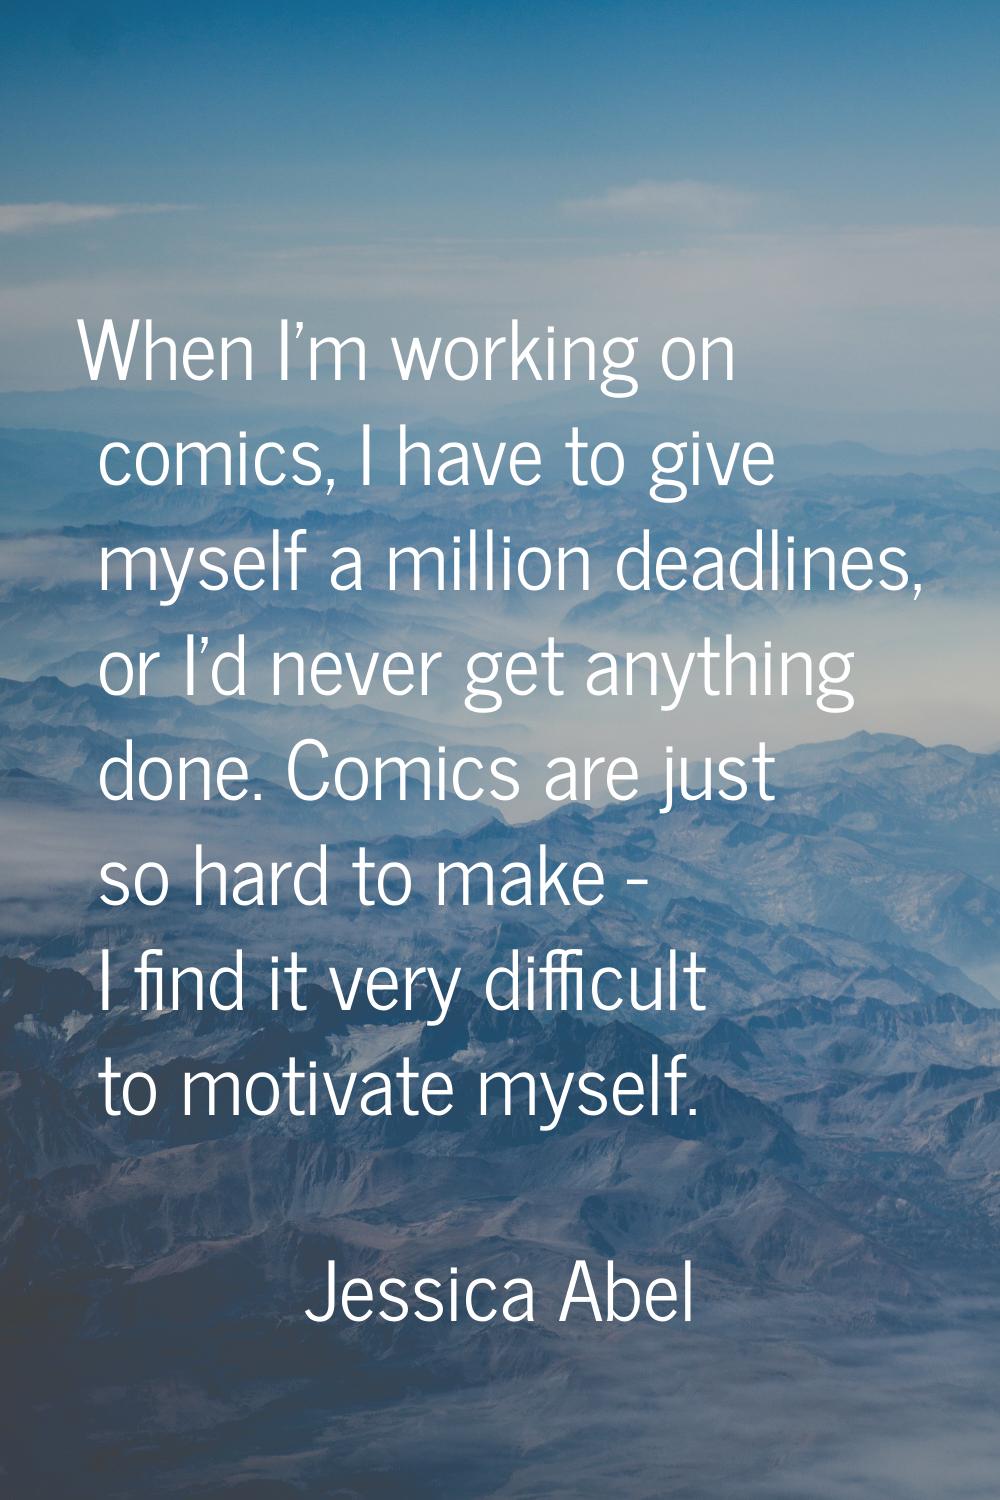 When I'm working on comics, I have to give myself a million deadlines, or I'd never get anything do